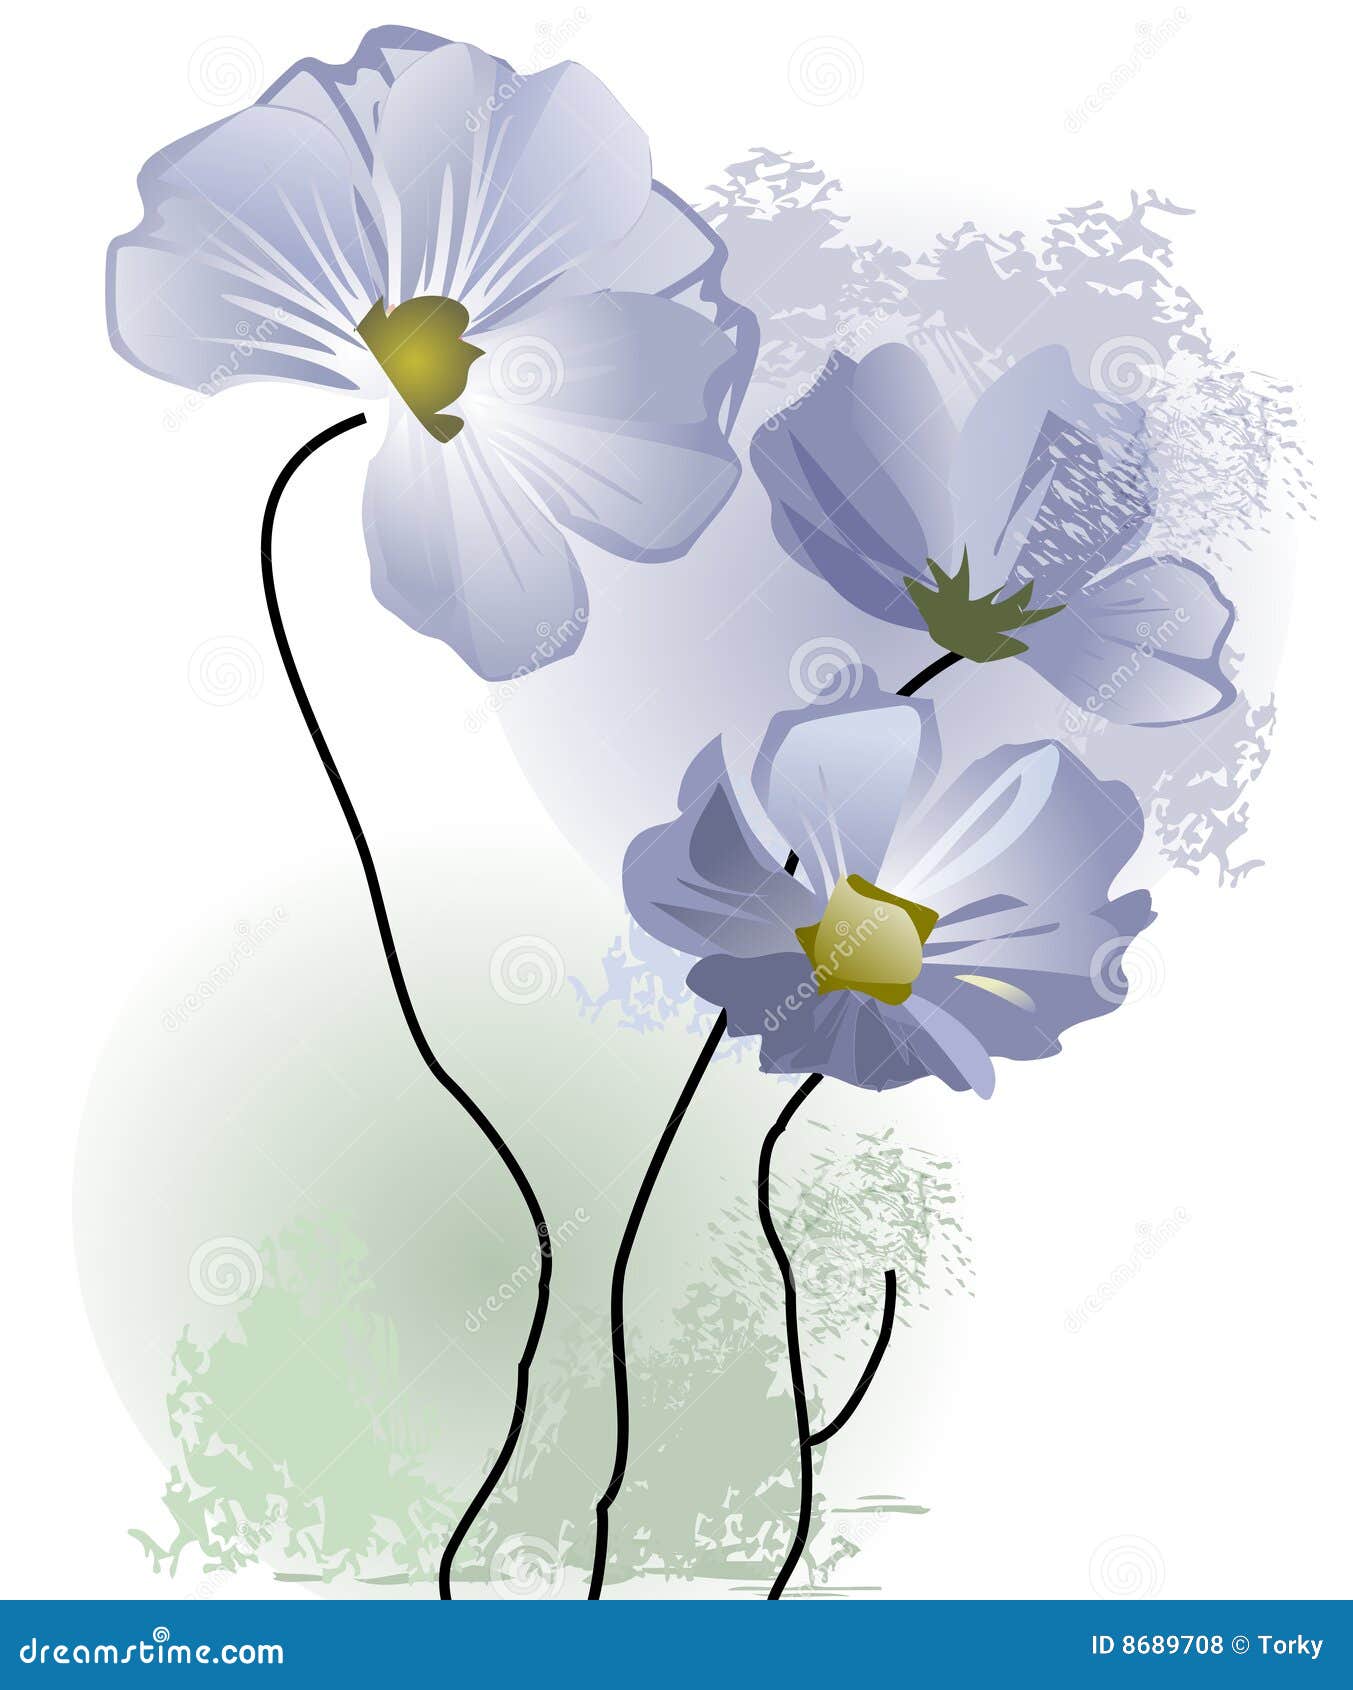 clipart delicate flowers - photo #38